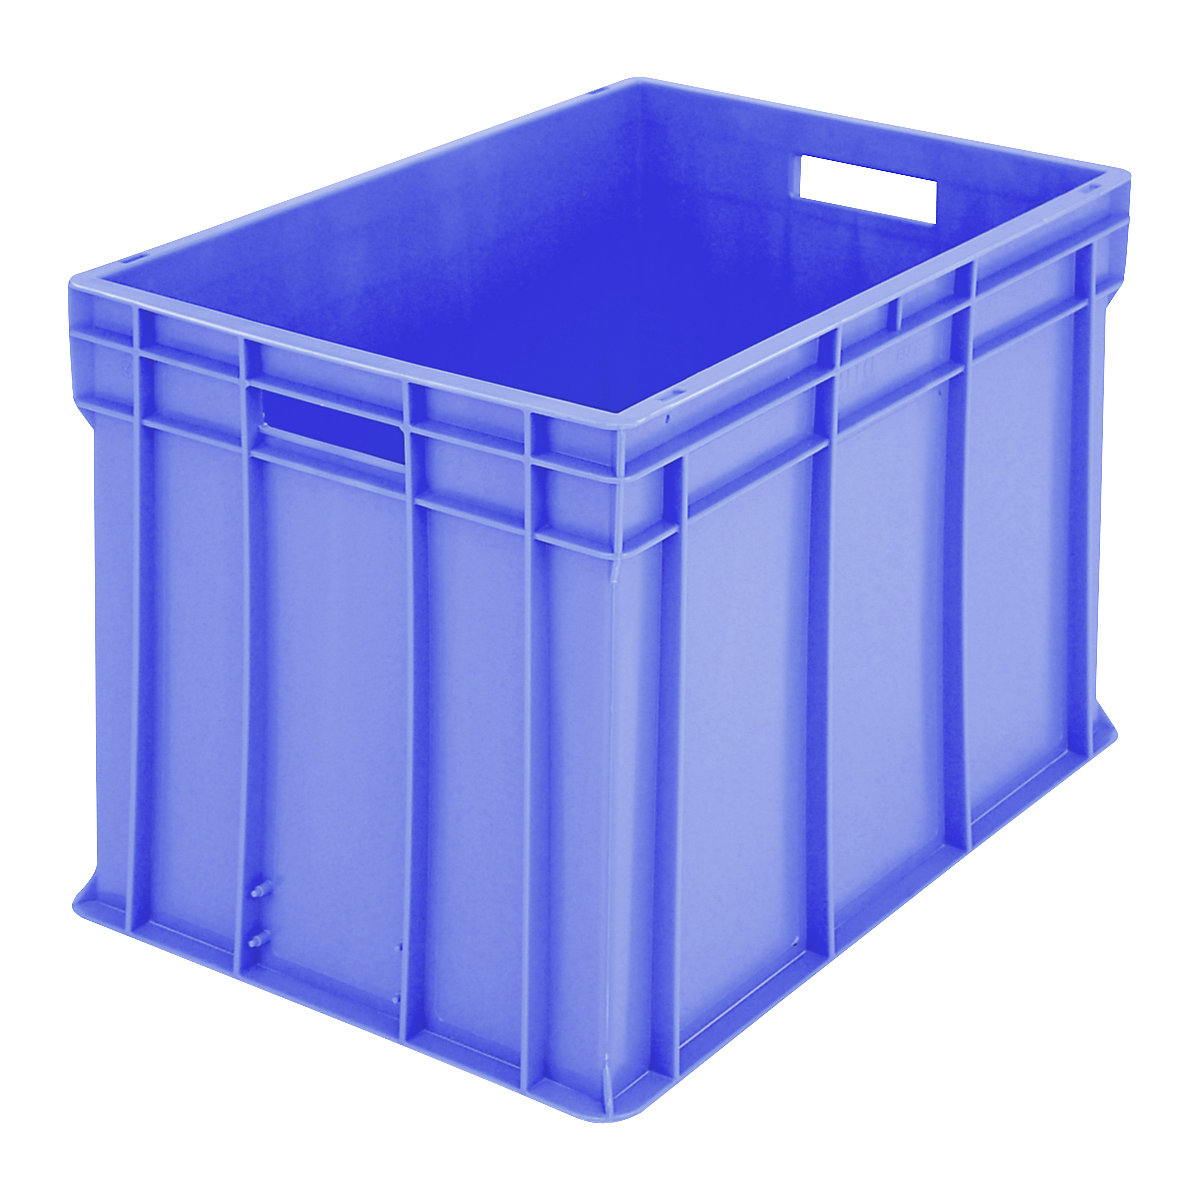 BN Euro stacking container – BITO, solid walls and base, LxWxH 600 x 400 x 415 mm-8